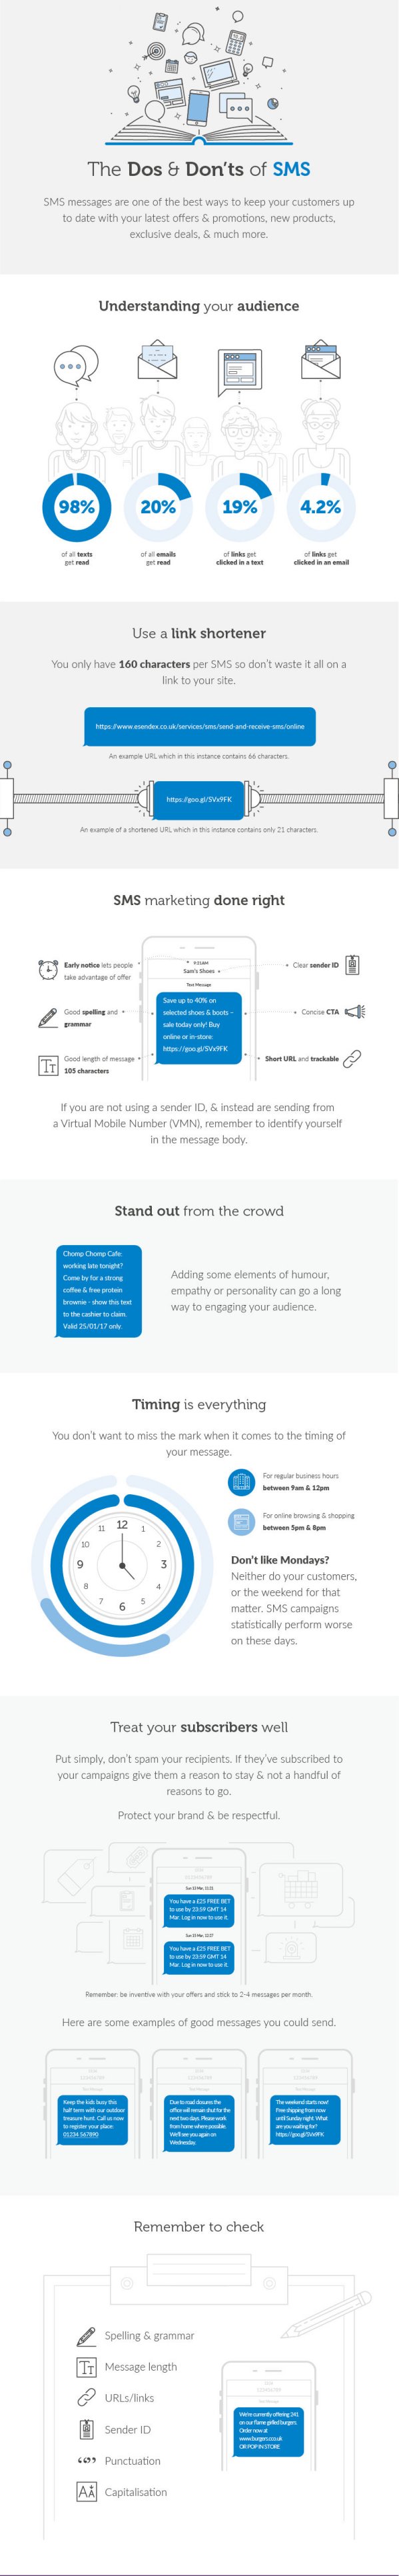 SMS marketing Infographic